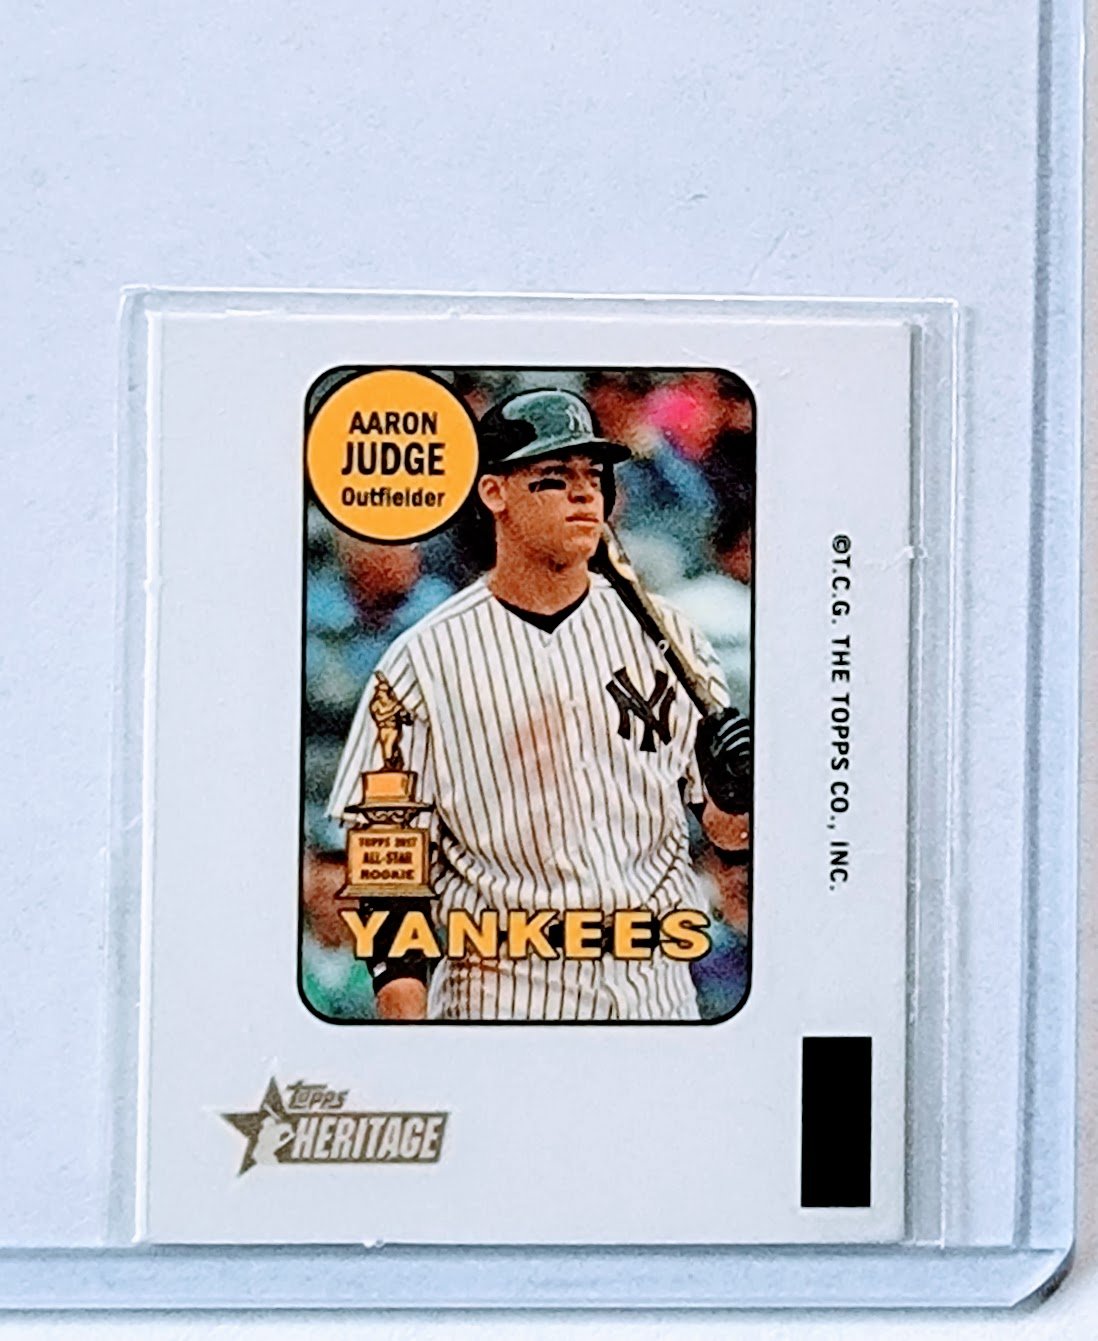 2018 Topps Heritage Aaron Judge All Star Rookie Mini Baseball Card TPTV simple Xclusive Collectibles   